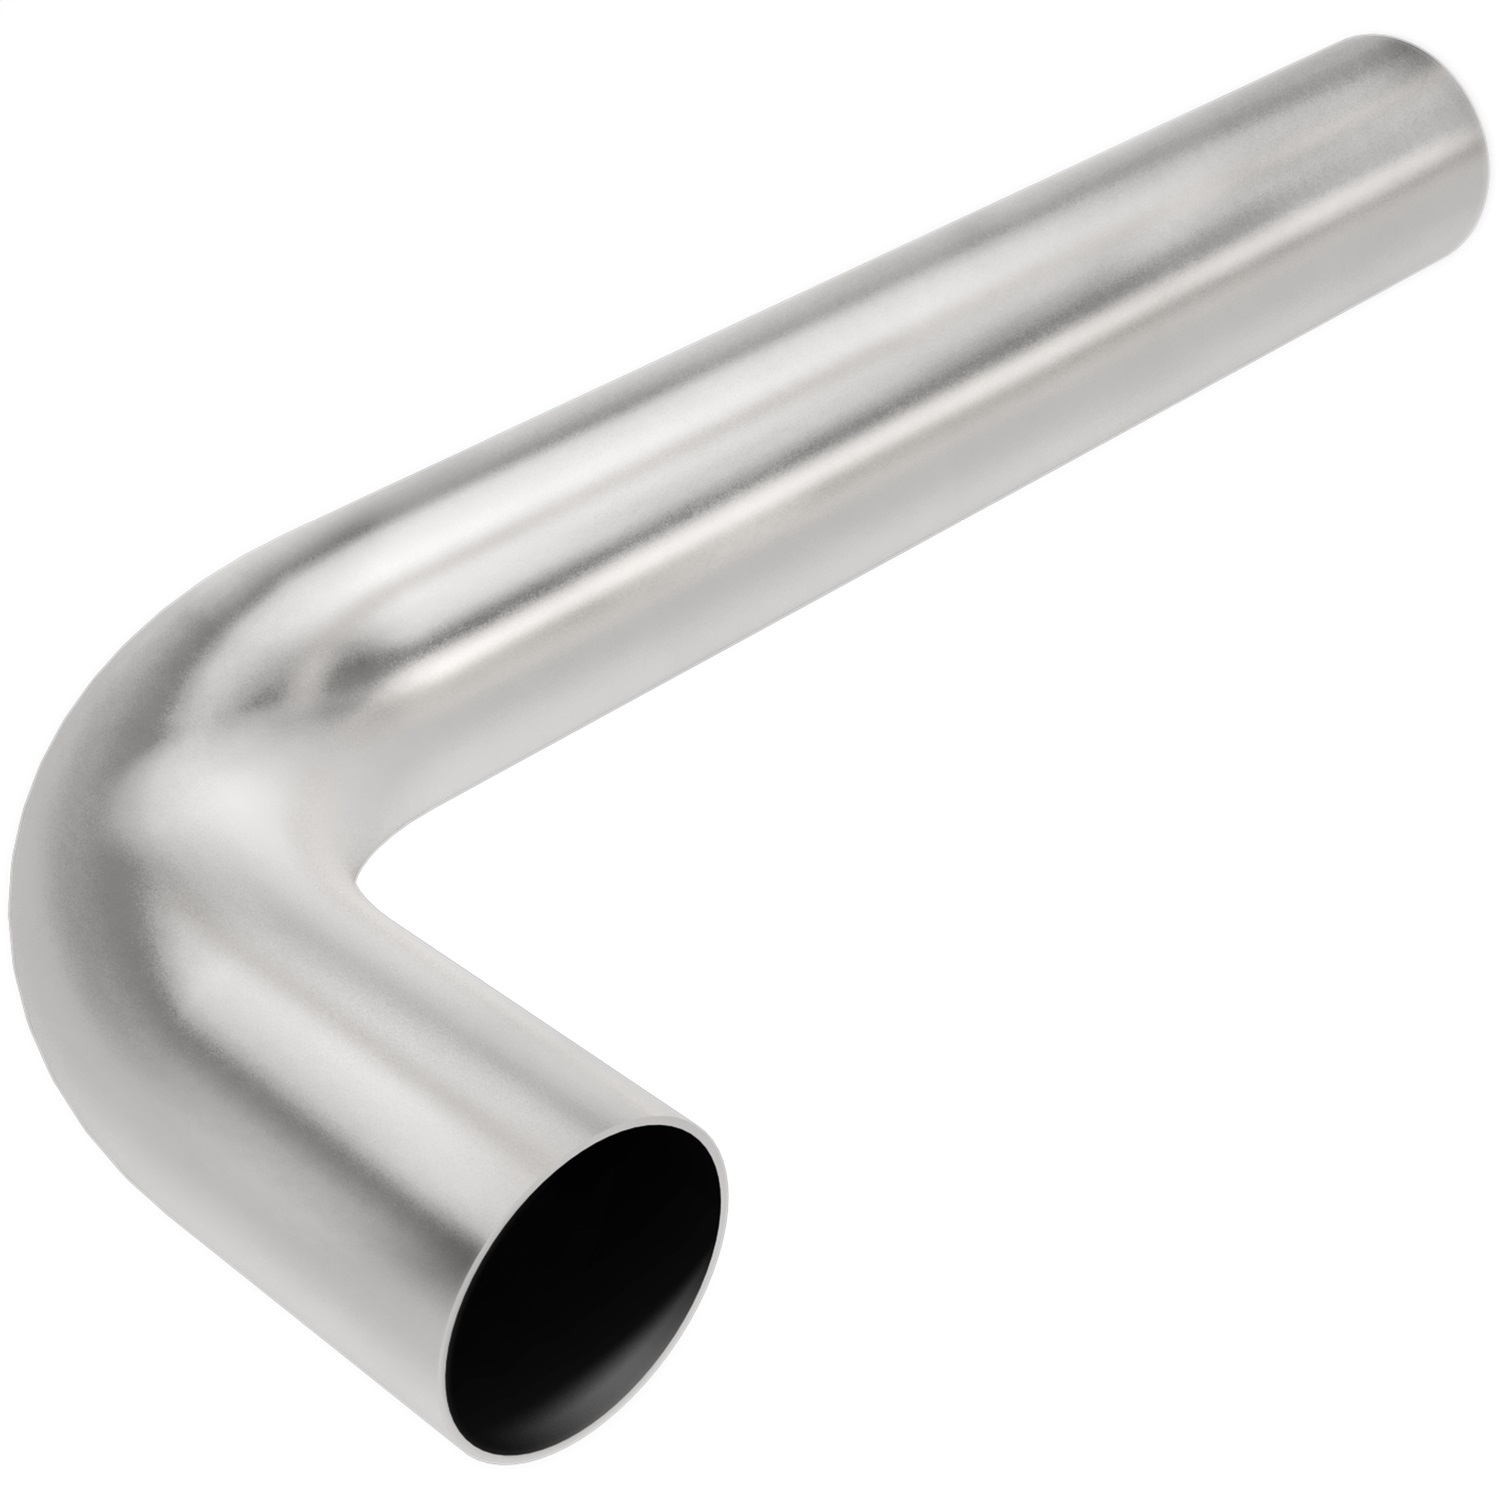 Magnaflow Performance Exhaust Magnaflow Performance Exhaust 10709 Smooth Transitions Exhaust Pipe